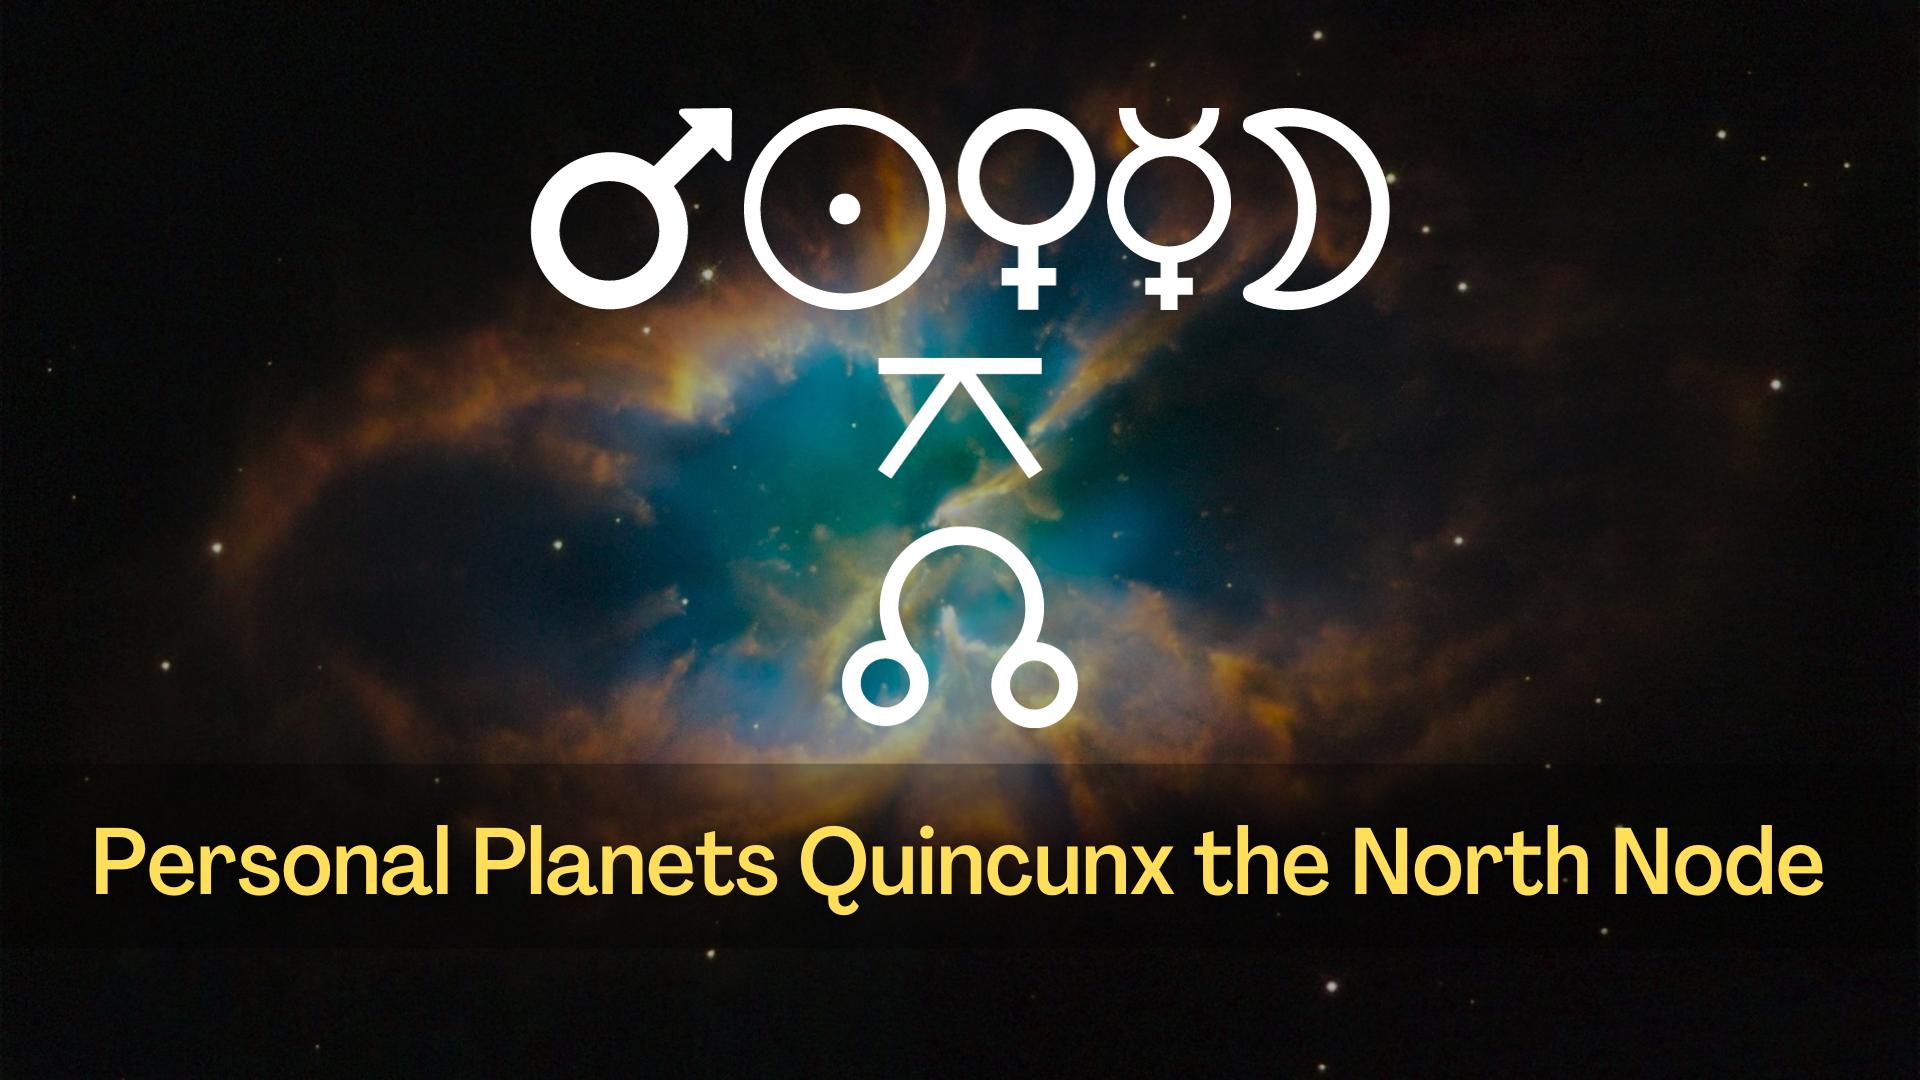 Personal Planets Quincunx the North Node